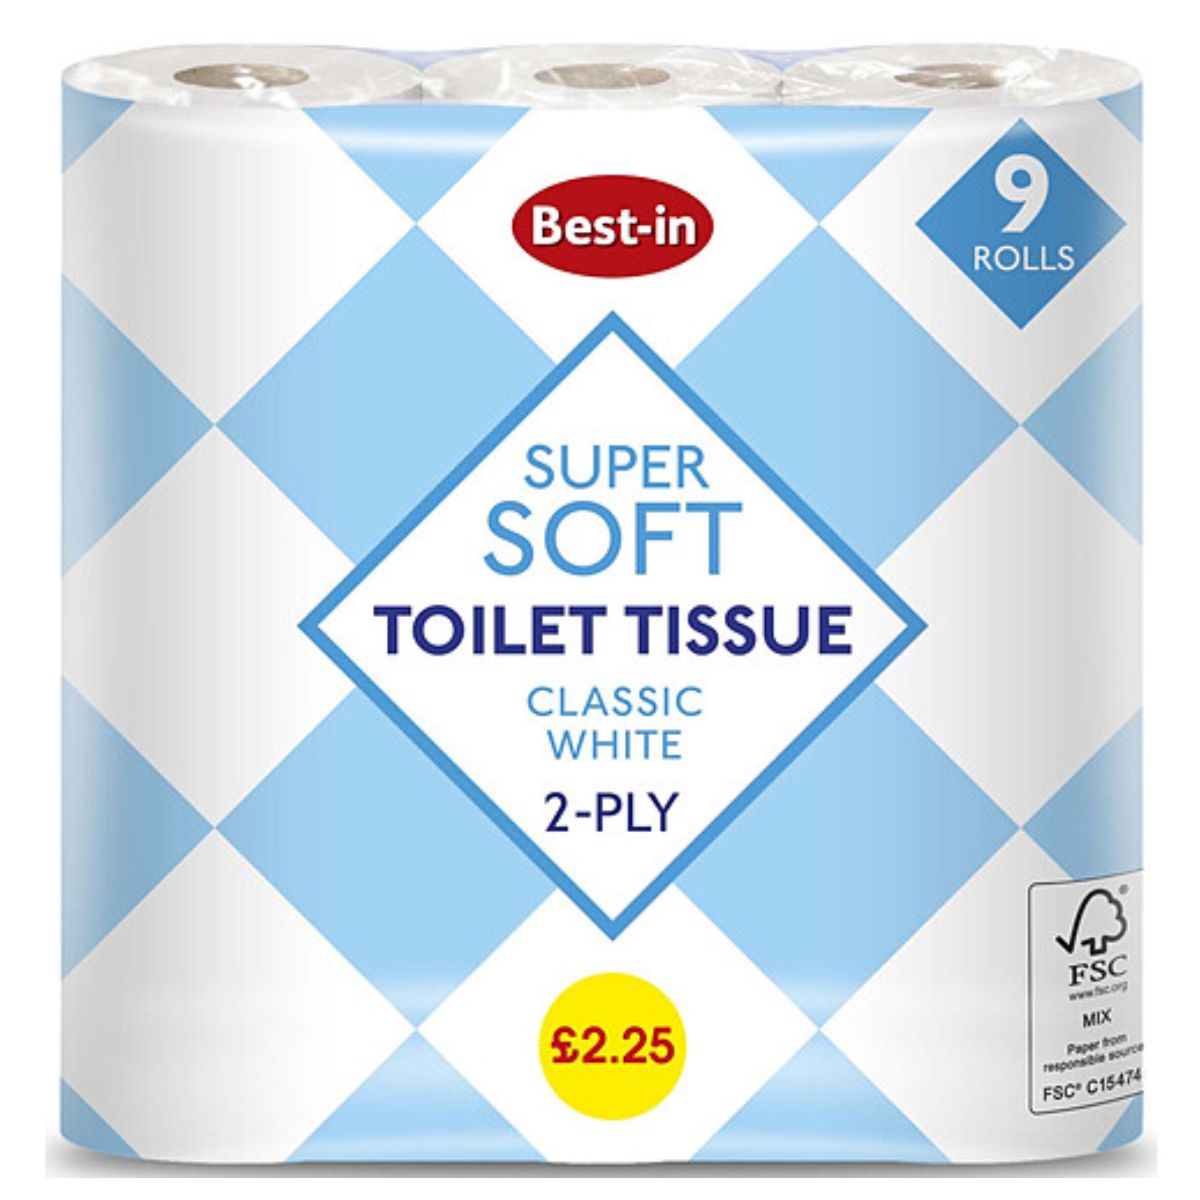 Pack of Best In - Soft Toilet Tissue White - 9pcs, classic white 2-ply, in blue and white packaging, priced at £2.25.